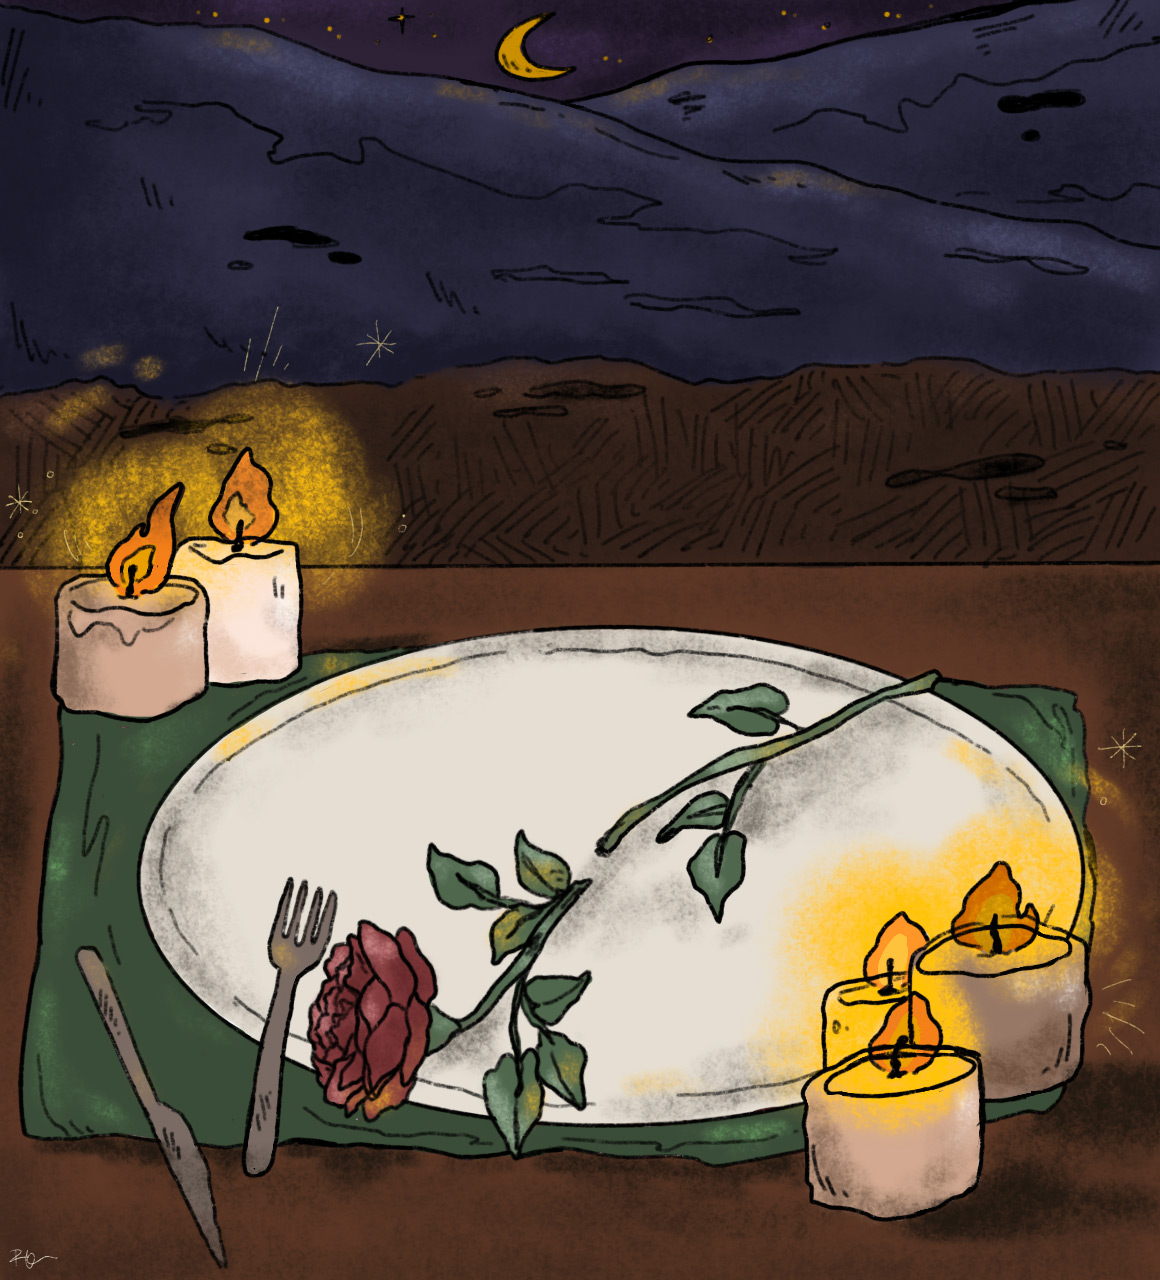 table-set-with-candles-and-rose-illustration